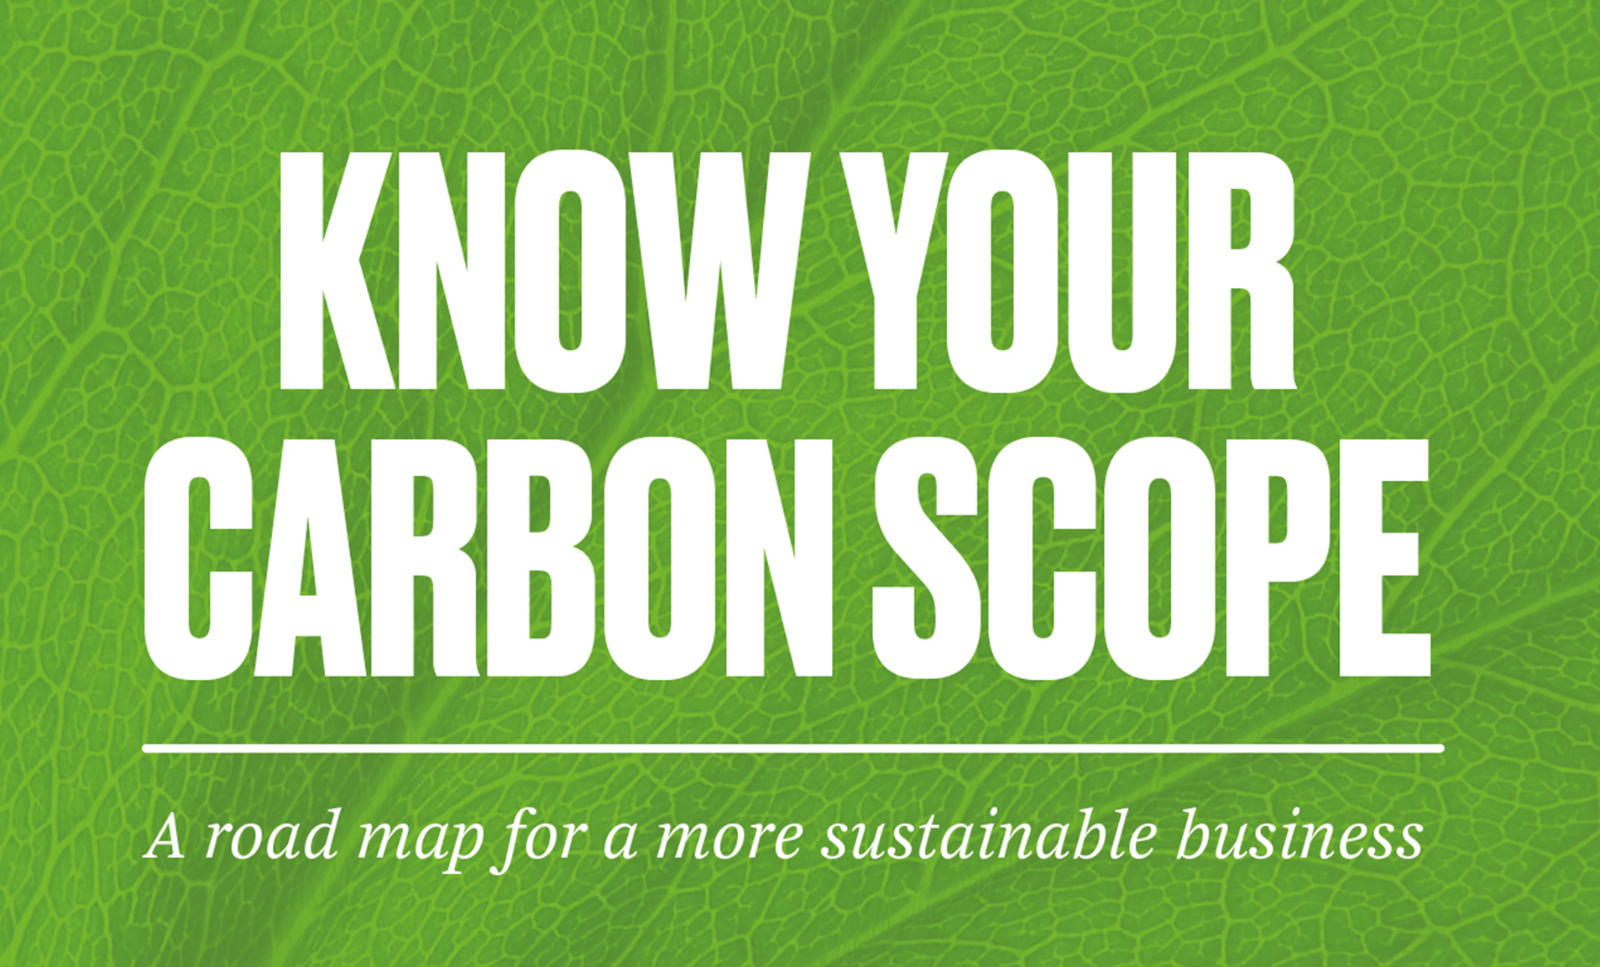 The title "Know your carbon scope" and the teaser below the title "A road map for a more sustainable business" are in front of a green leaf background.